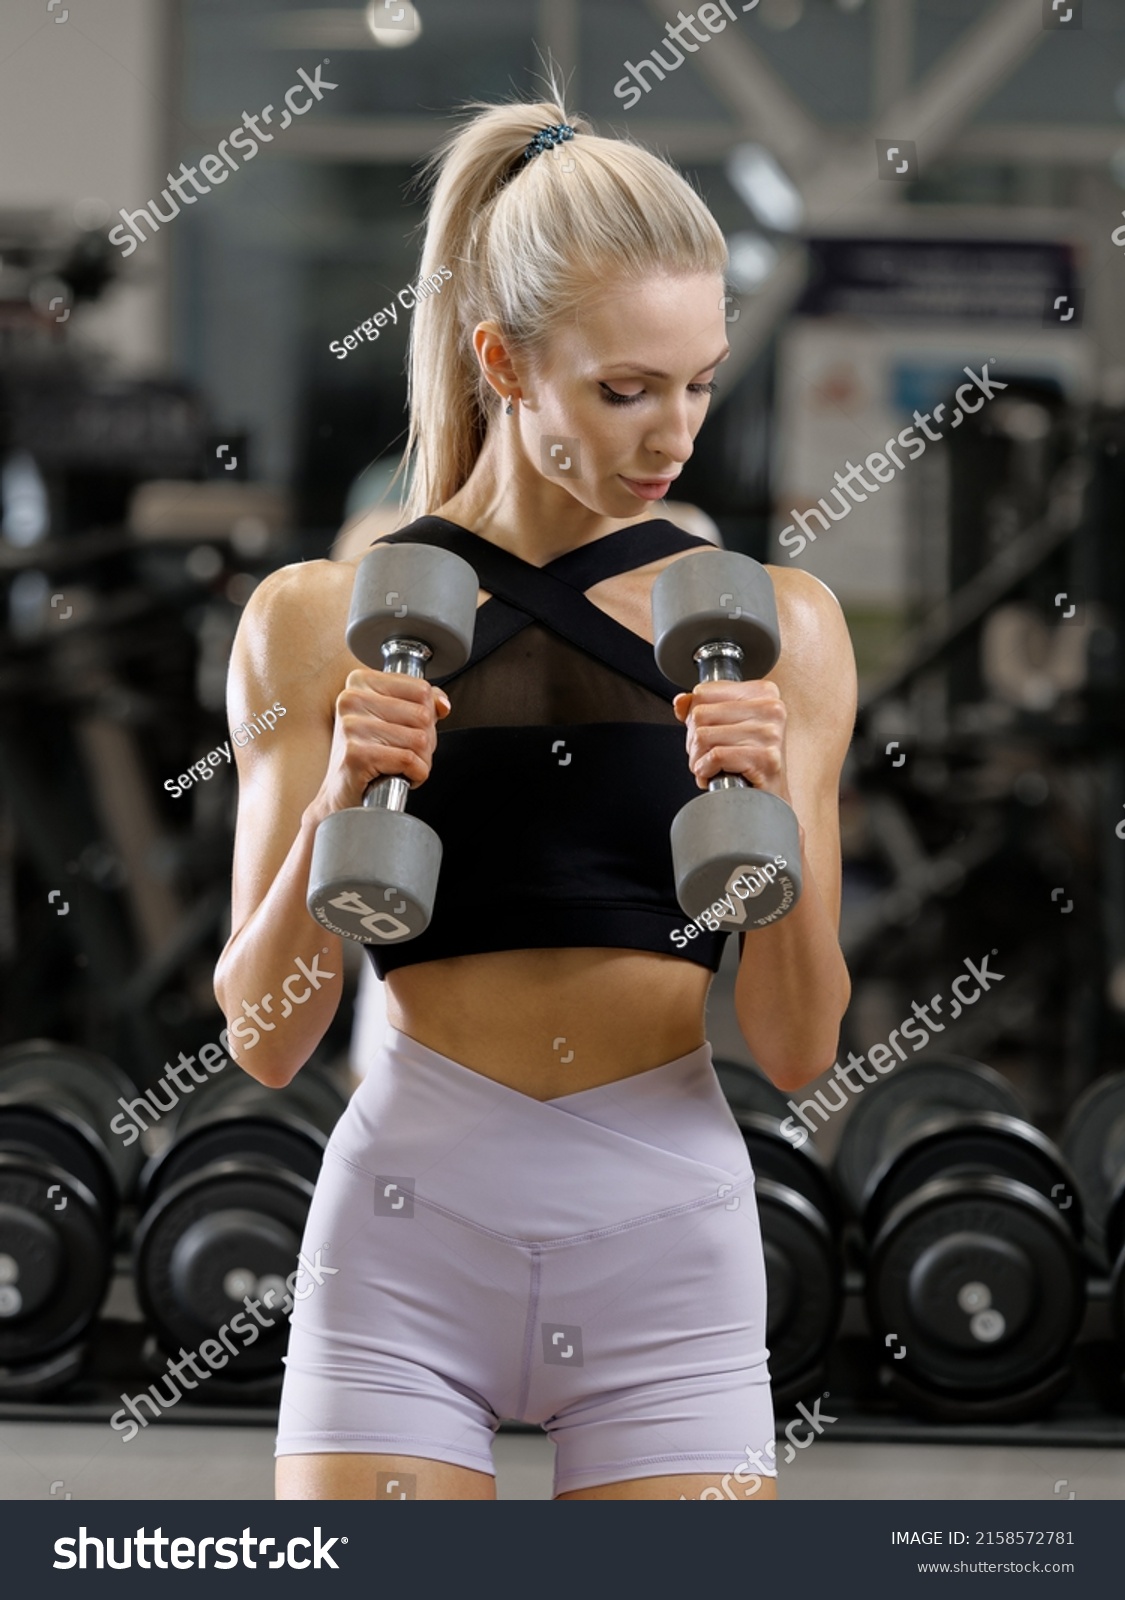 Fitness Woman Dumbbells Gym Muscular Attractive Stock Photo Shutterstock